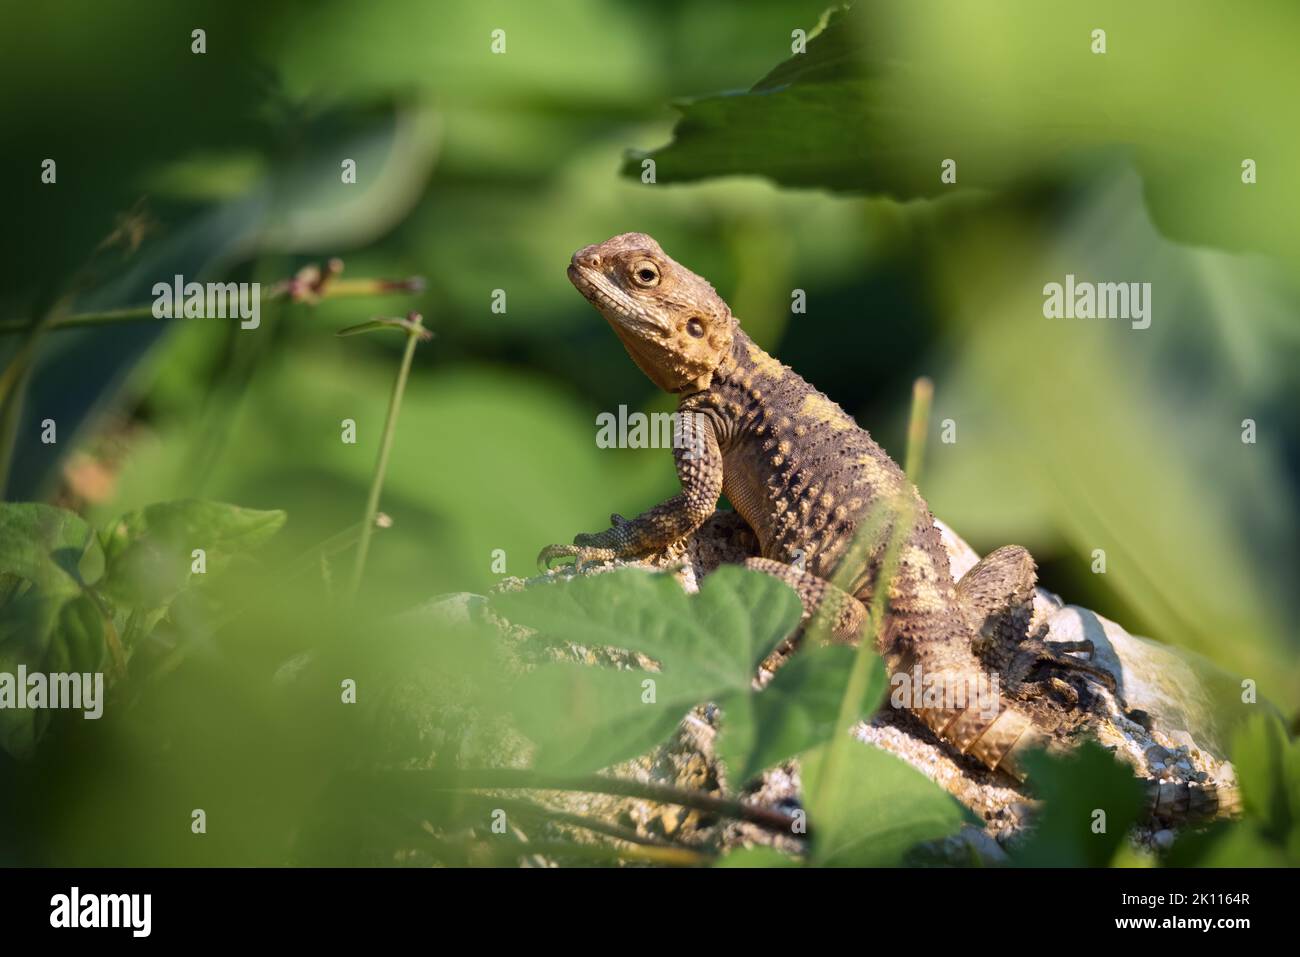 The European Agama lizard sits on a stone on green nature background Stock Photo